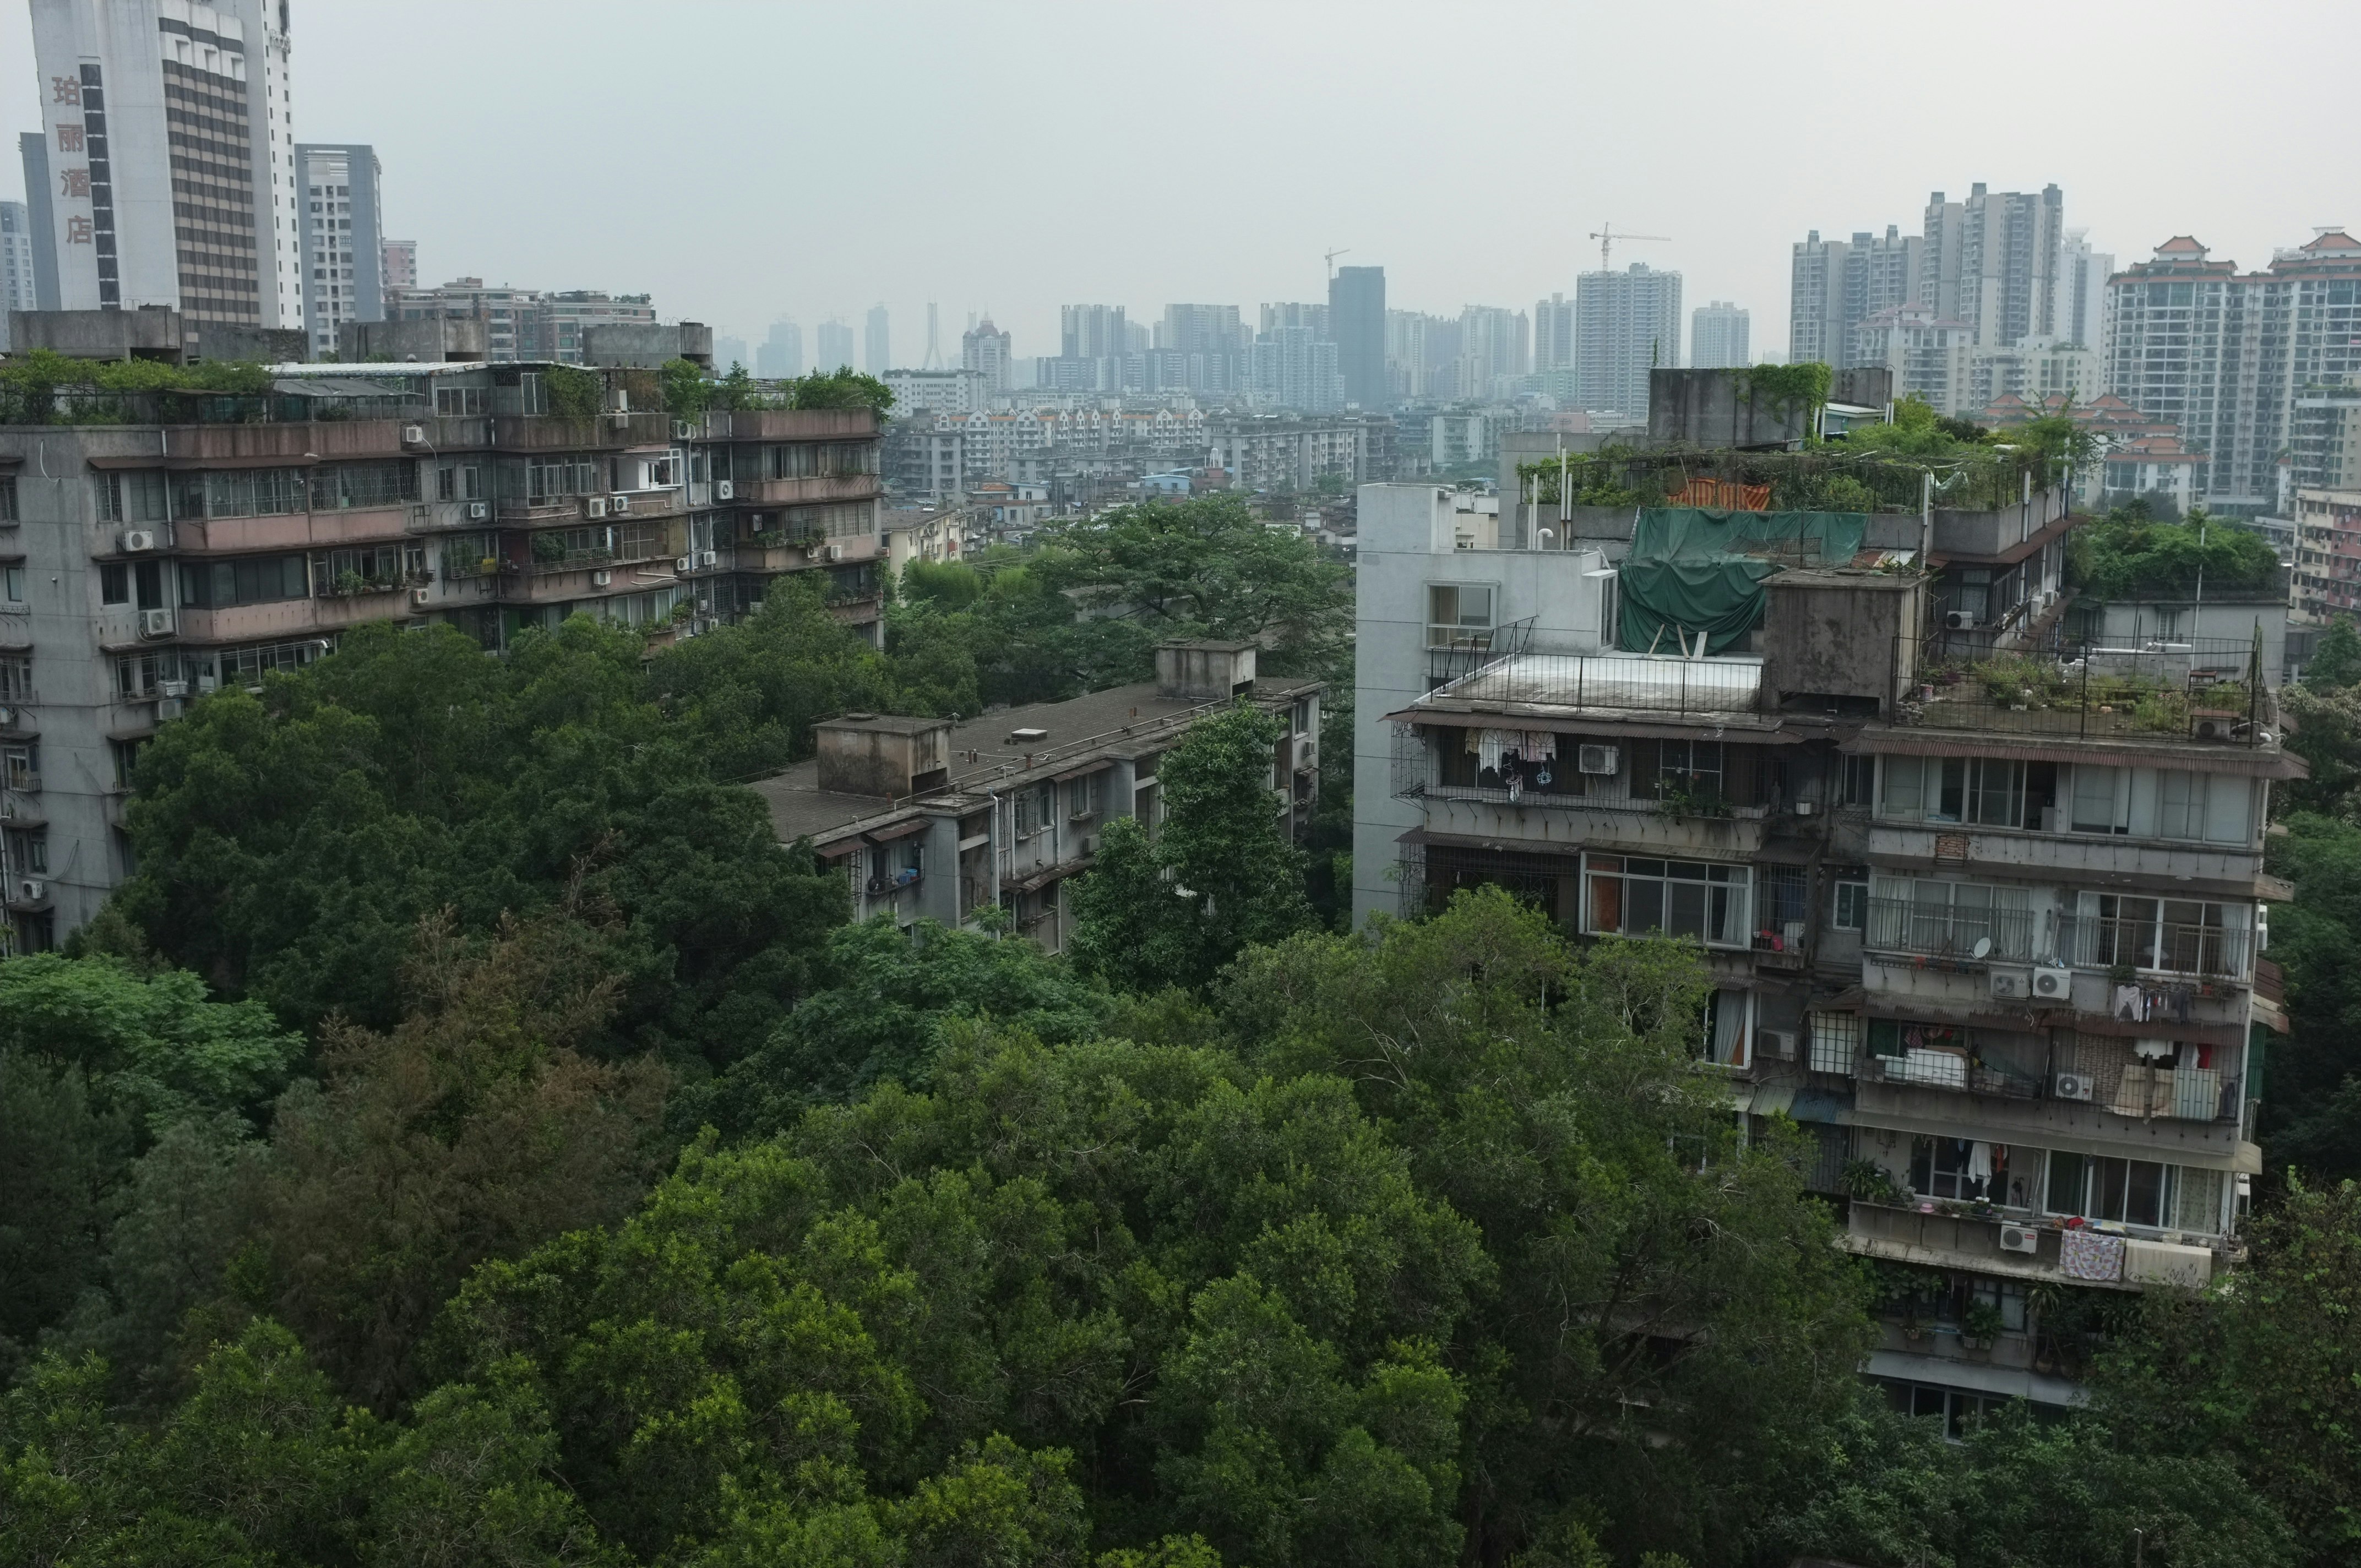 Grey apartments in Guangzhou, surrounded by dense foliage of trees.